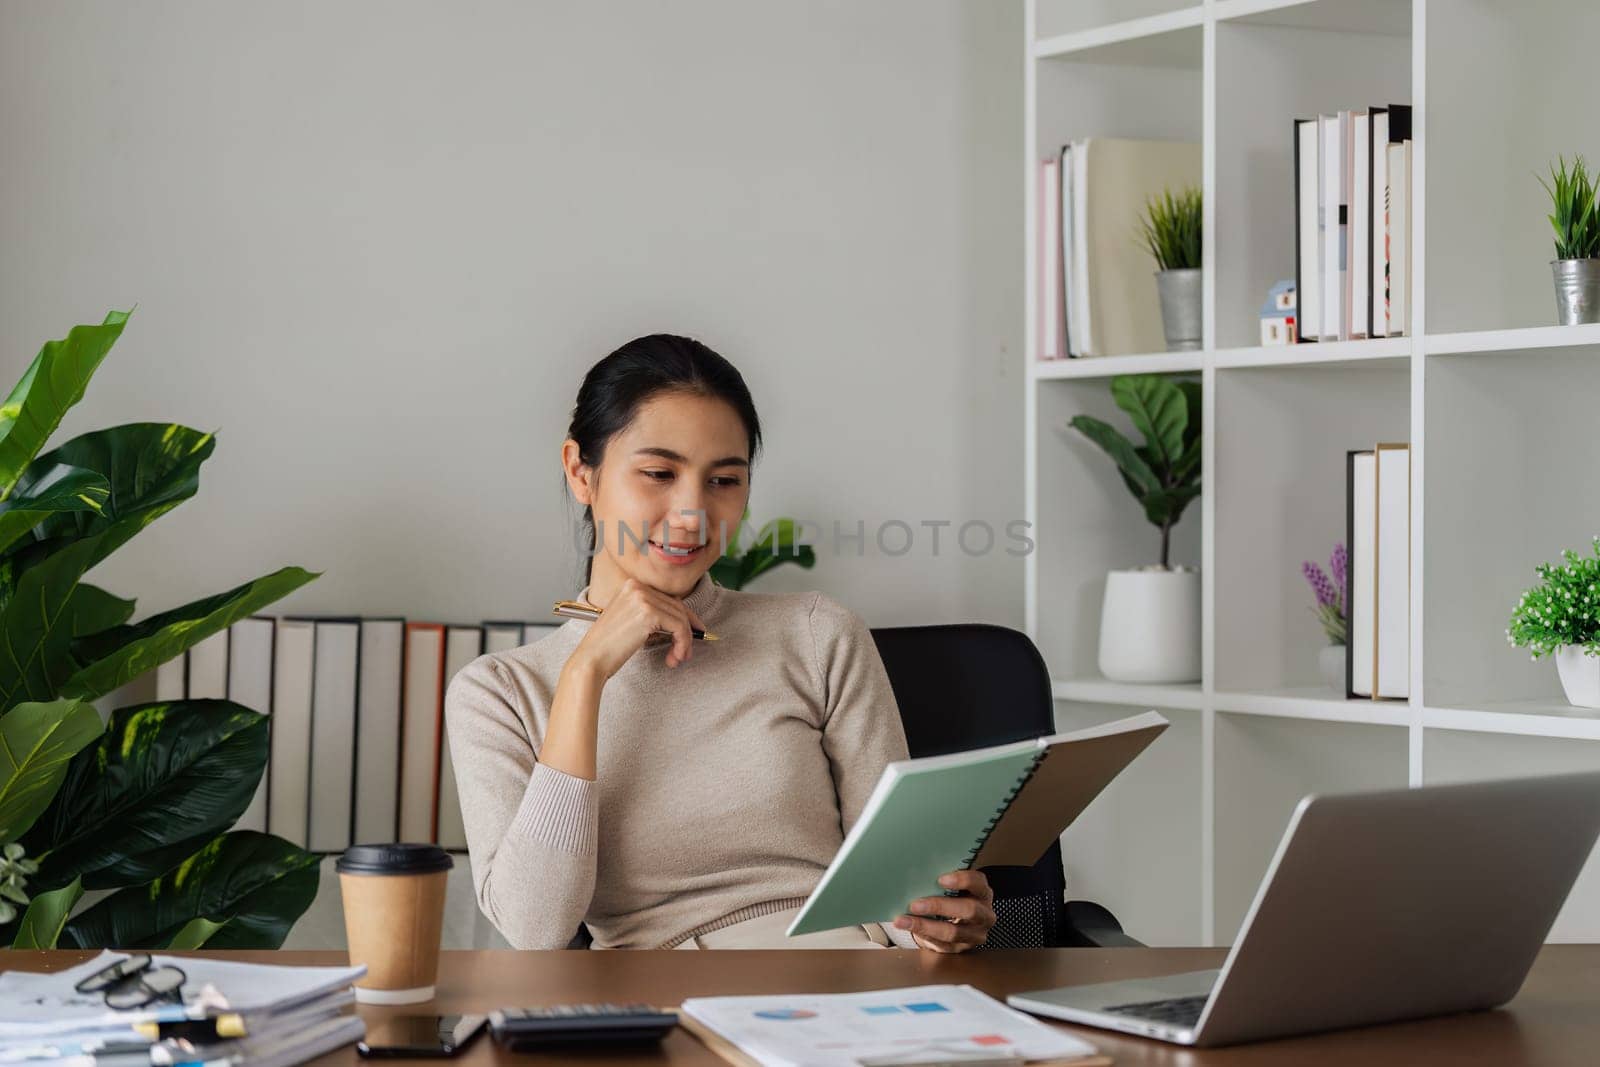 woman taking note in notebook while using laptop at home. business woman writing plan on book while working on laptop in living room.